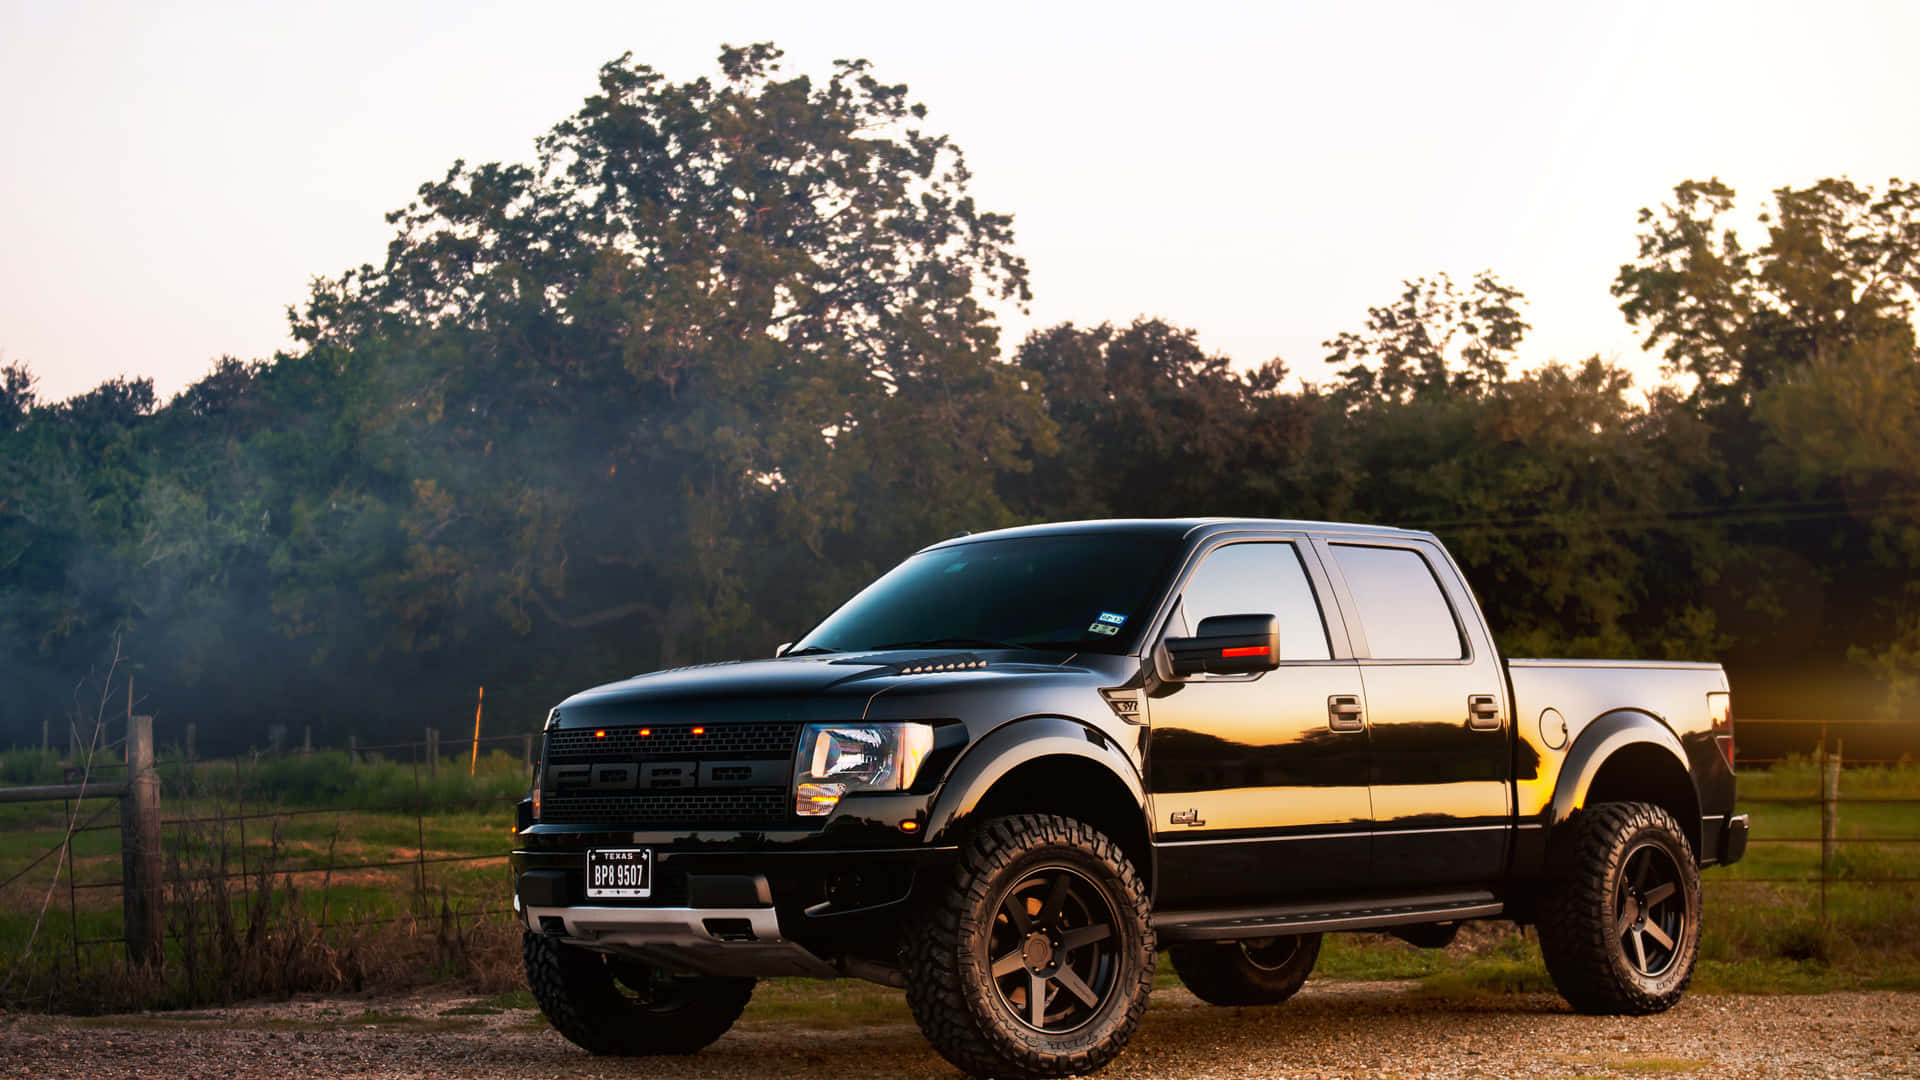 Explore The Great Outdoors In The All-new Ford Truck